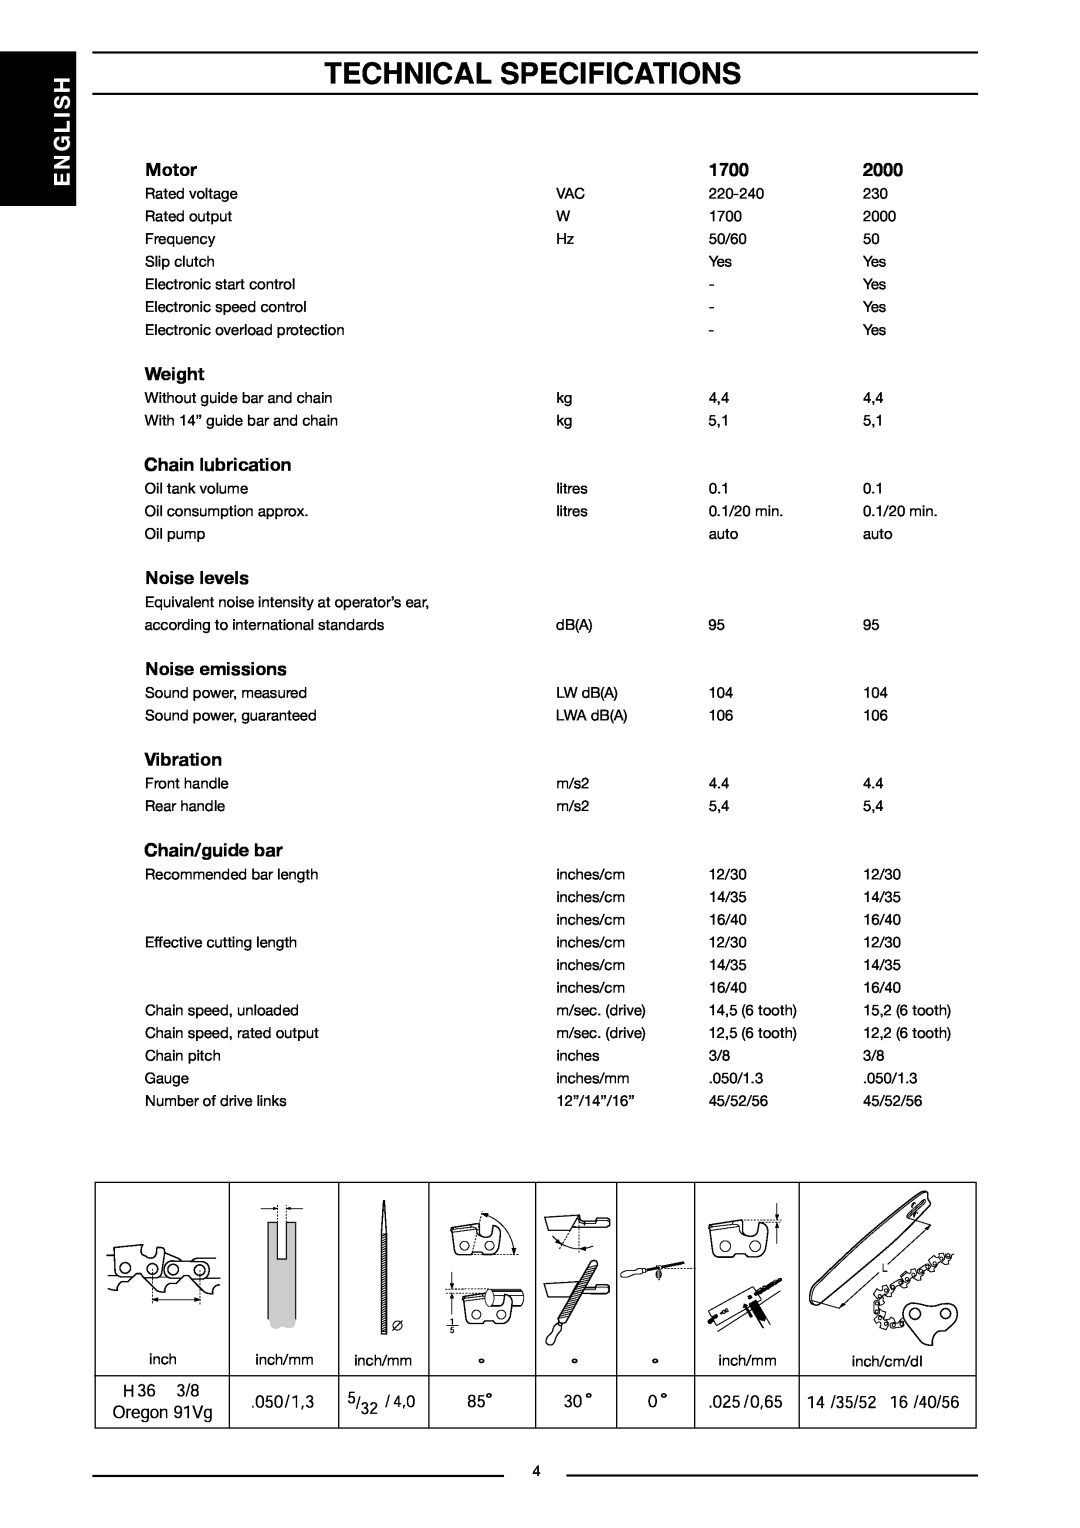 Jonsered CS 2121 EL manual Technical Specifications, English, Motor, 1700, 2000, Weight, Chain lubrication, Noise levels 